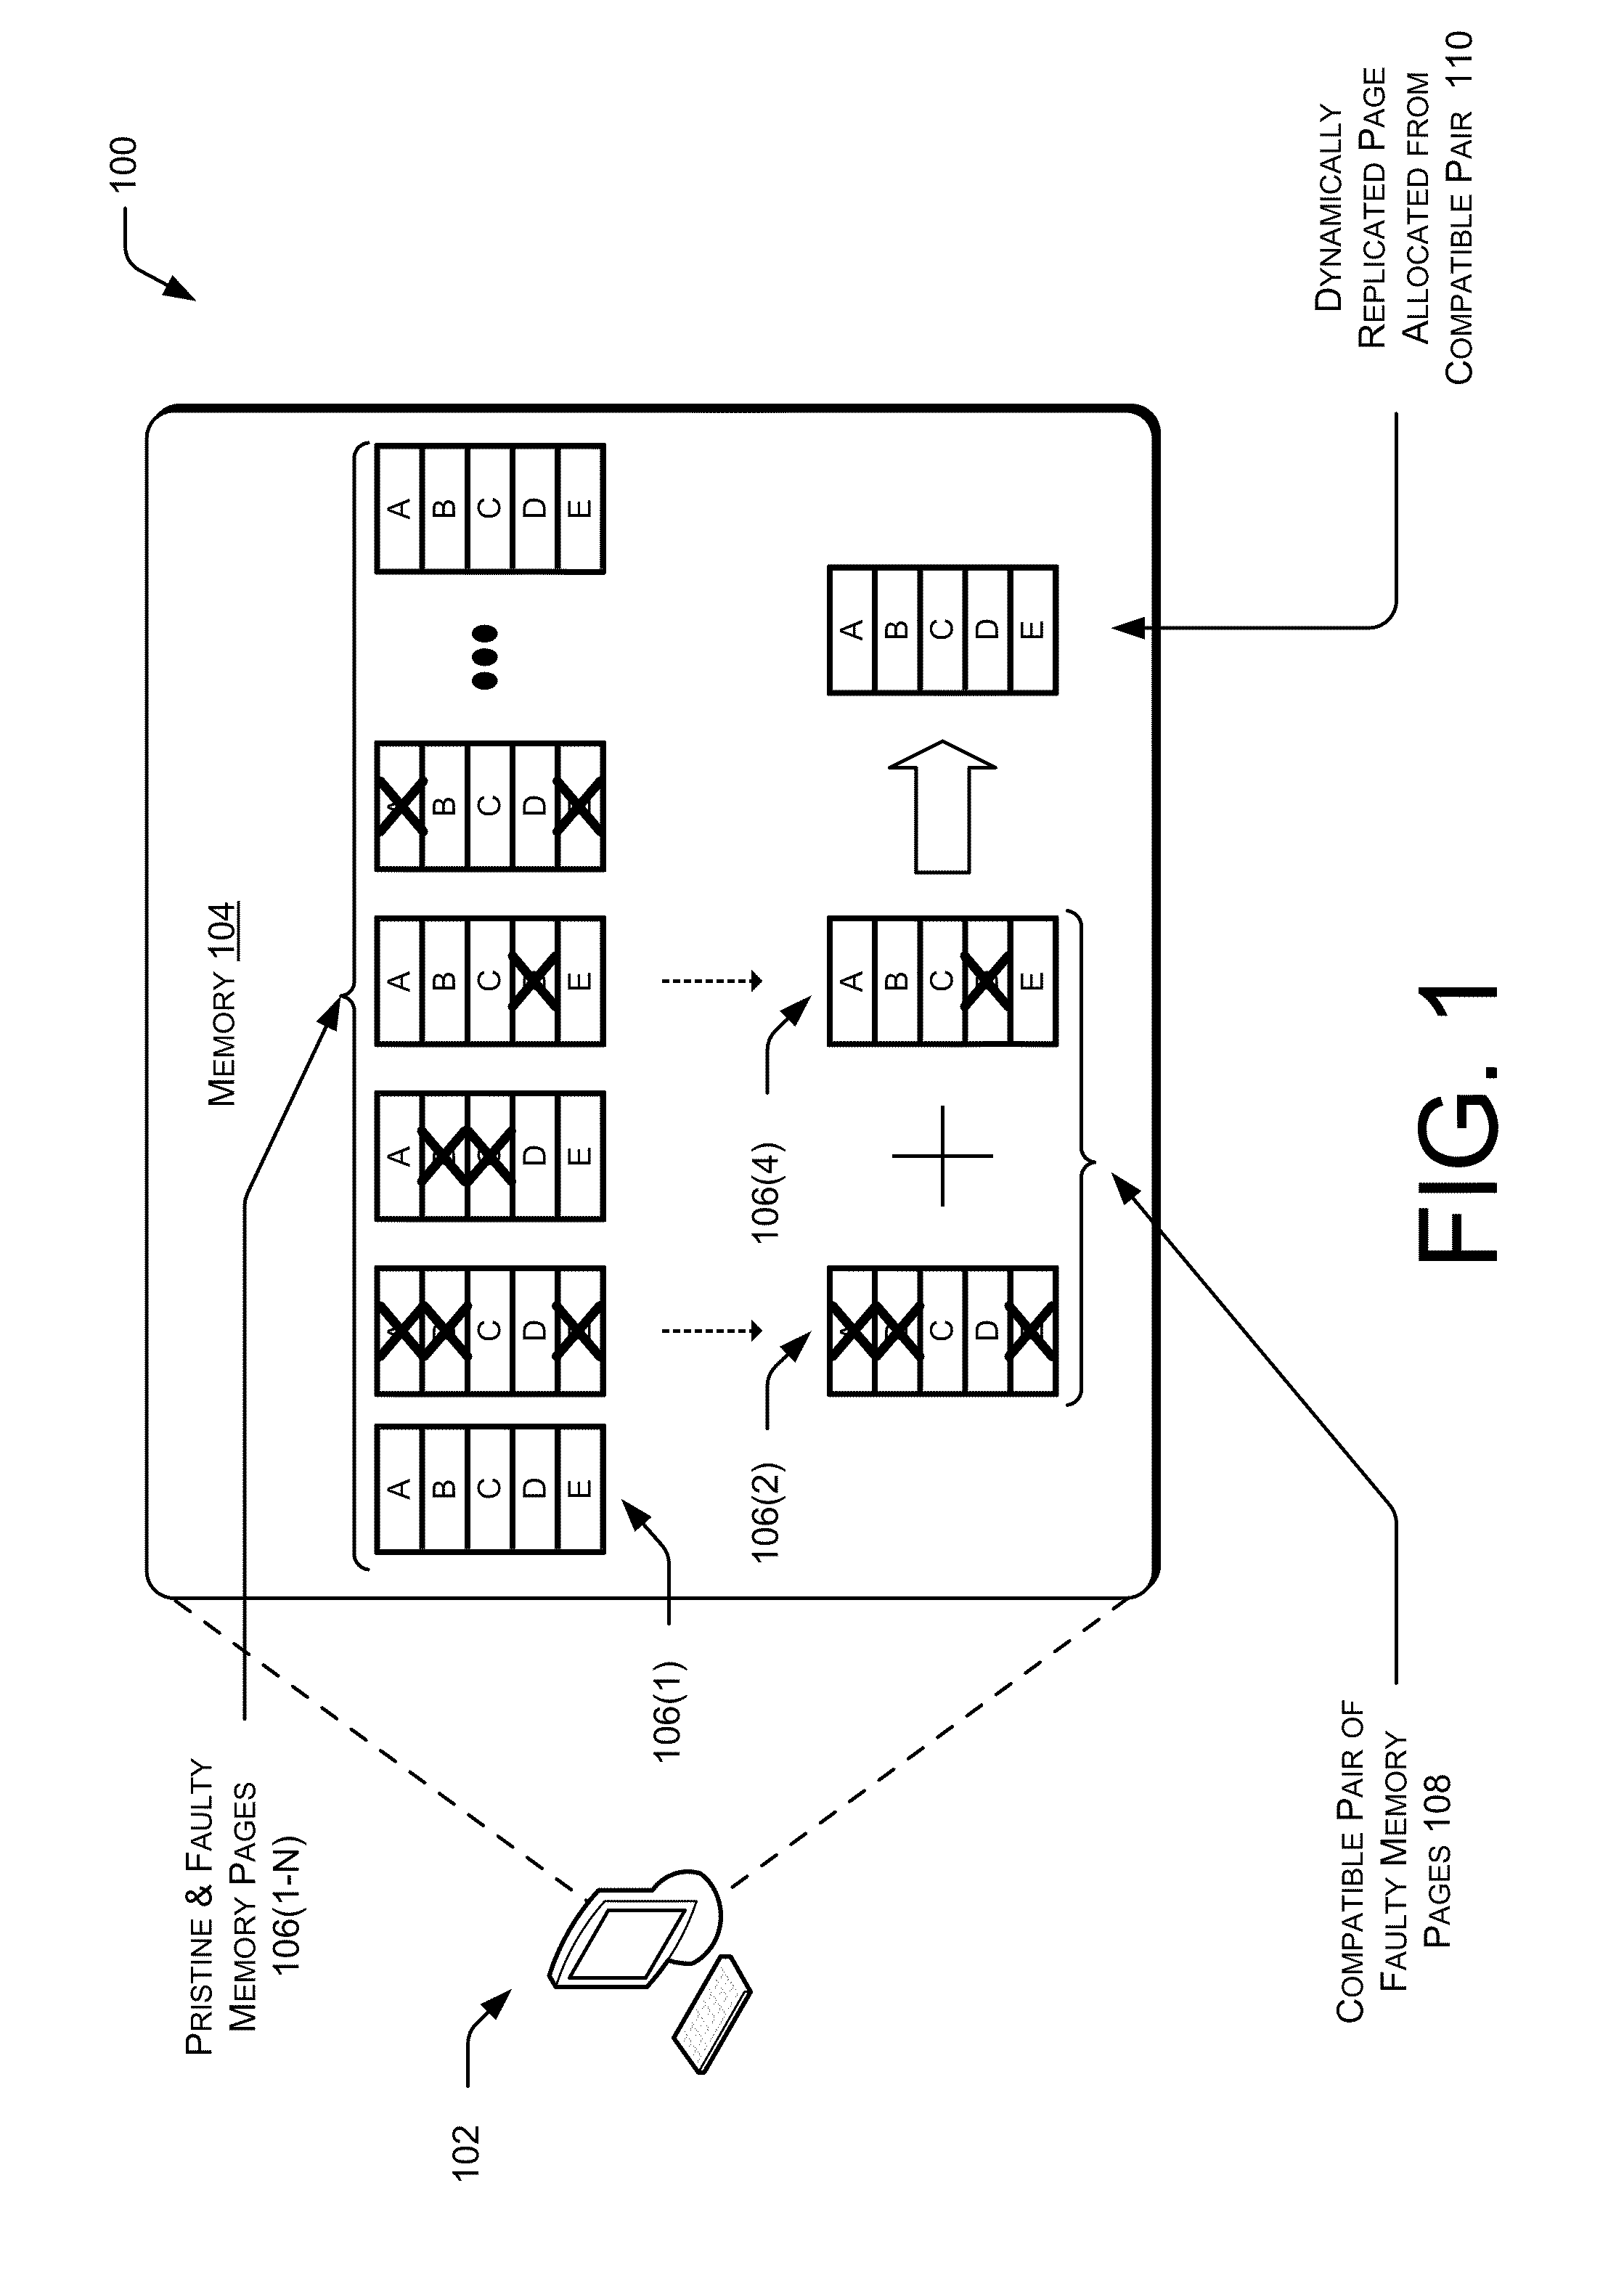 Efficiency of hardware memory access using dynamically replicated memory